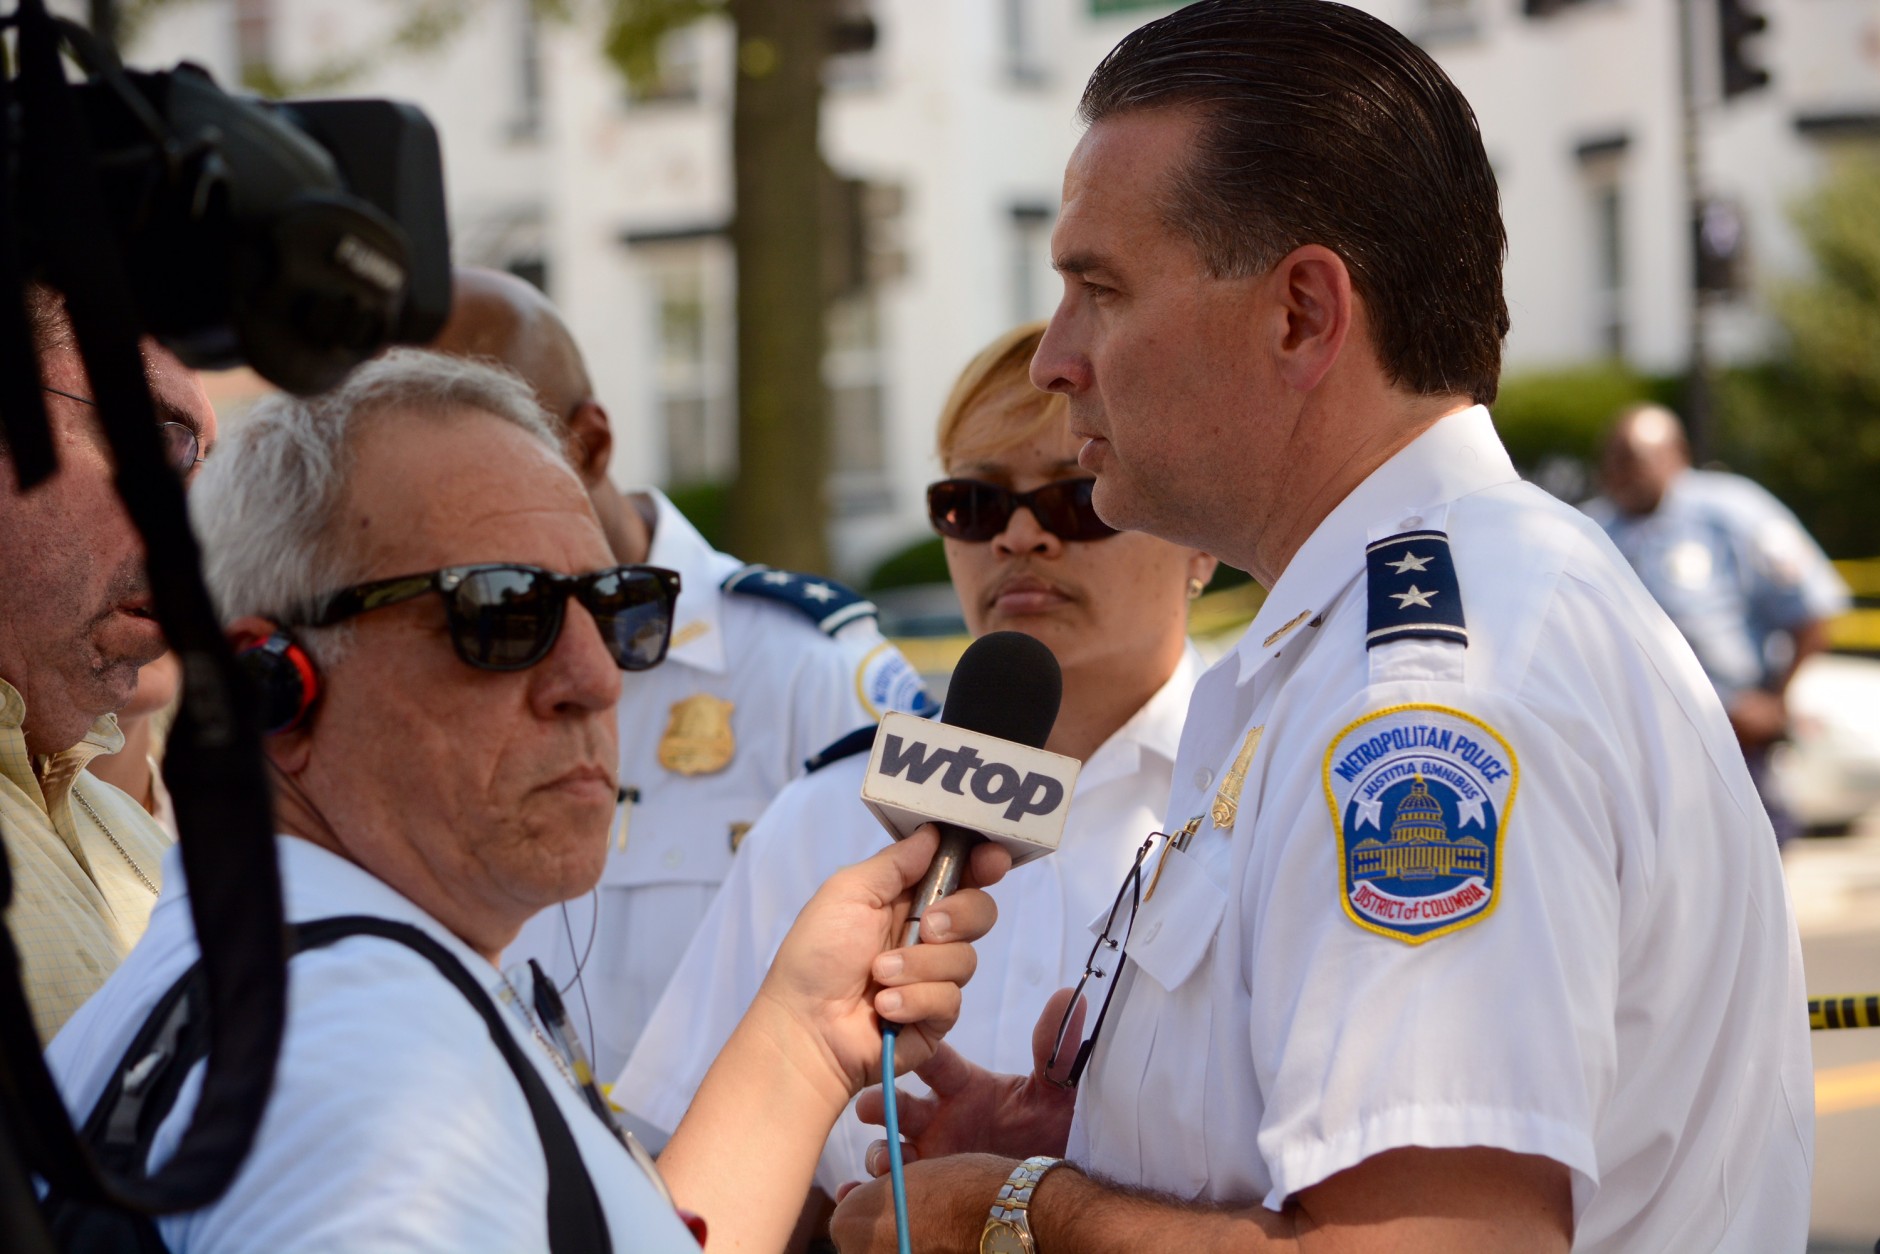 Assistant D.C. Police Chief Peter Newsham holds a news conference after a shooting in Petworth Wednesday afternoon. (WTOP/Dave Dildine)